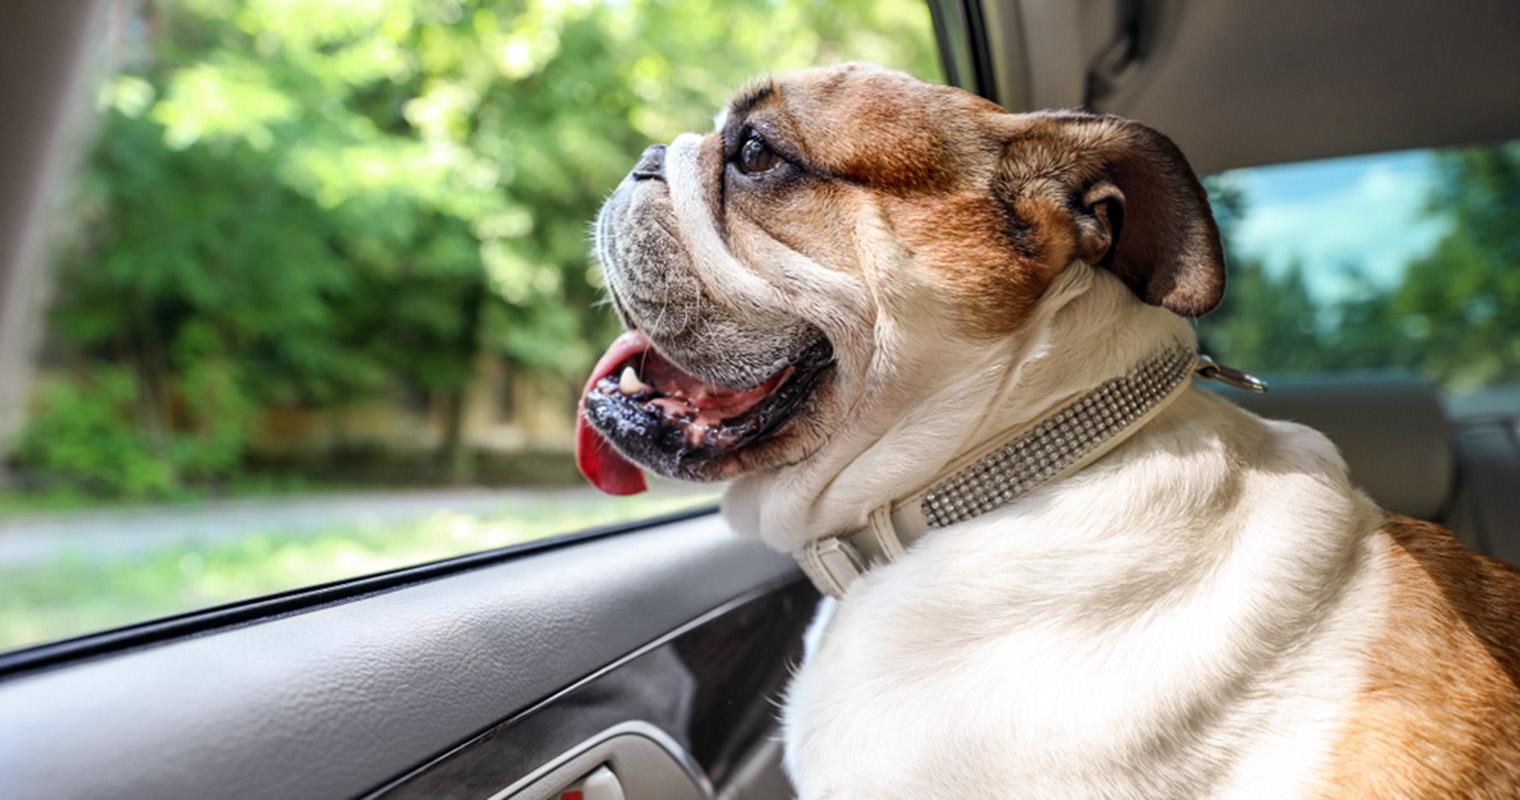 What is a Reasonable Rehoming Fee for an English Bulldog?